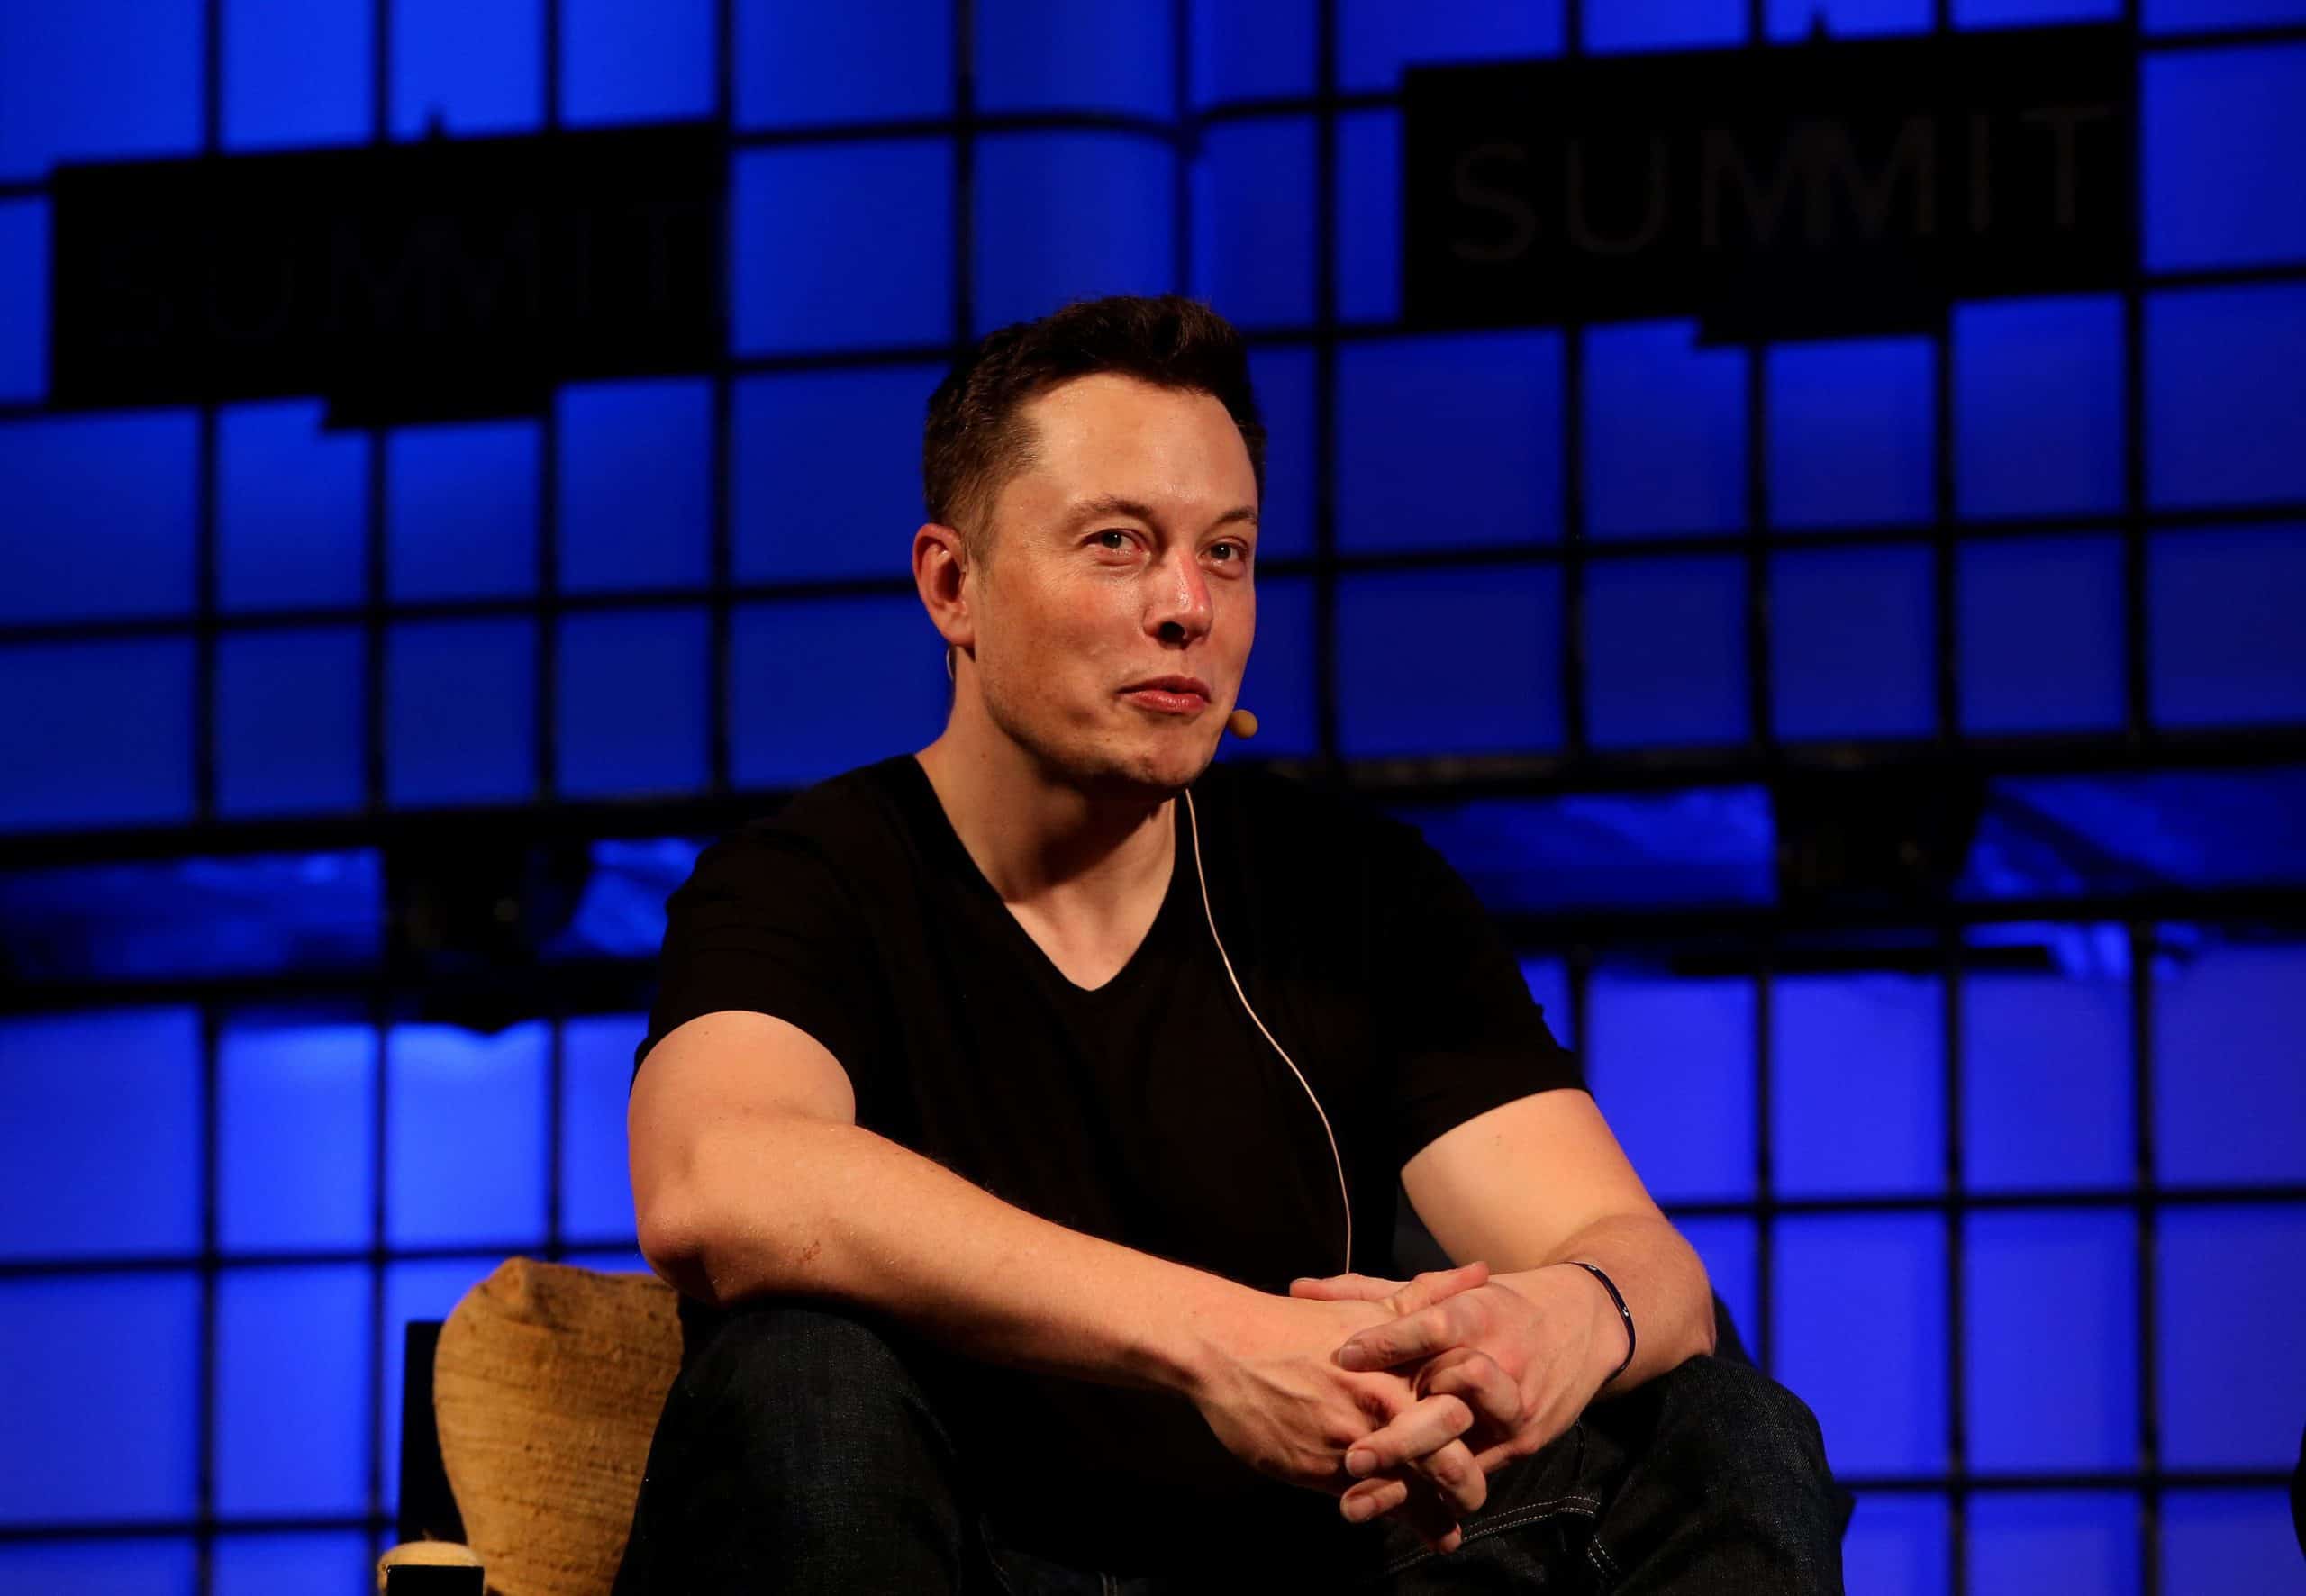 Elon Musk says sexual harassment claims should be viewed though ‘political lens’